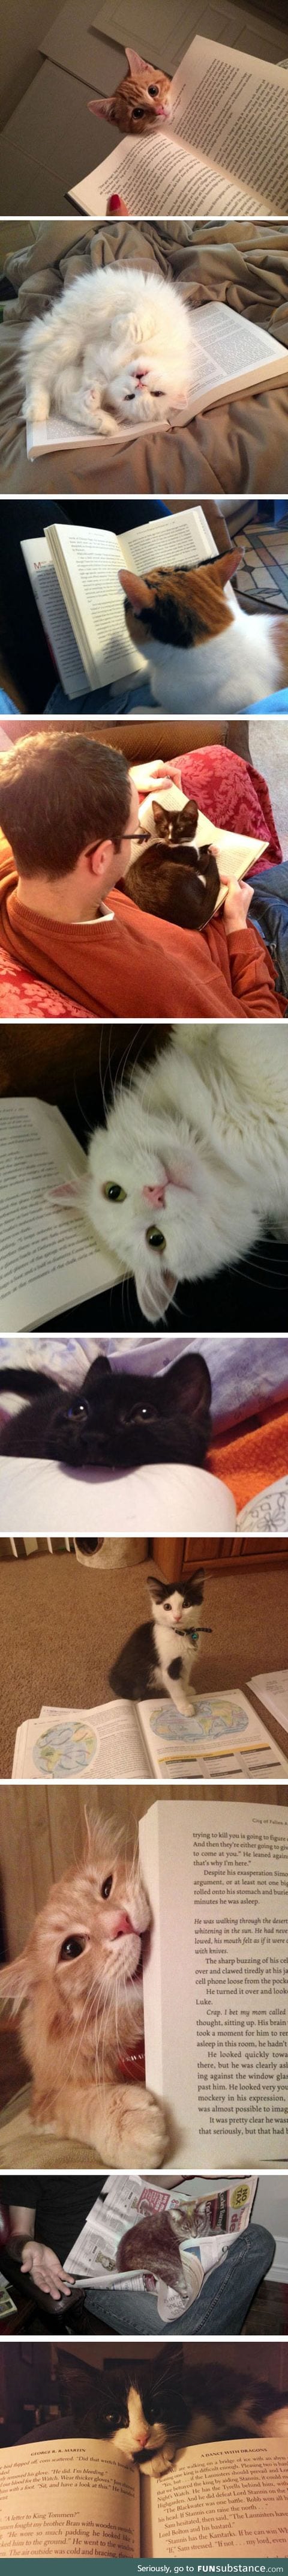 Cats Who Won't Let You Read Your Book